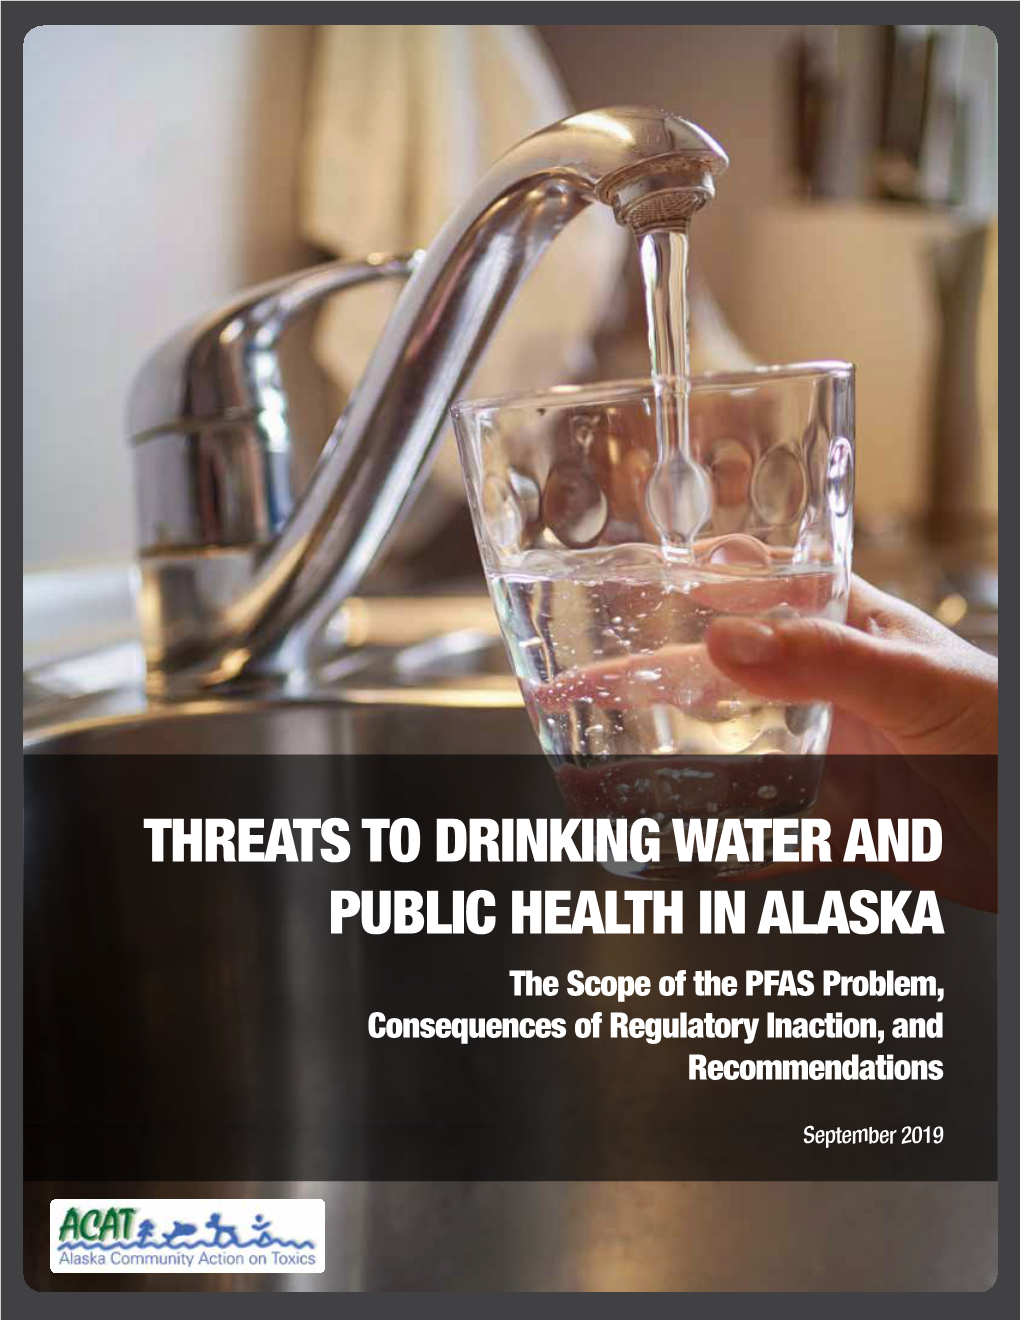 THREATS to DRINKING WATER and PUBLIC HEALTH in ALASKA the Scope of the PFAS Problem, Consequences of Regulatory Inaction, and Recommendations